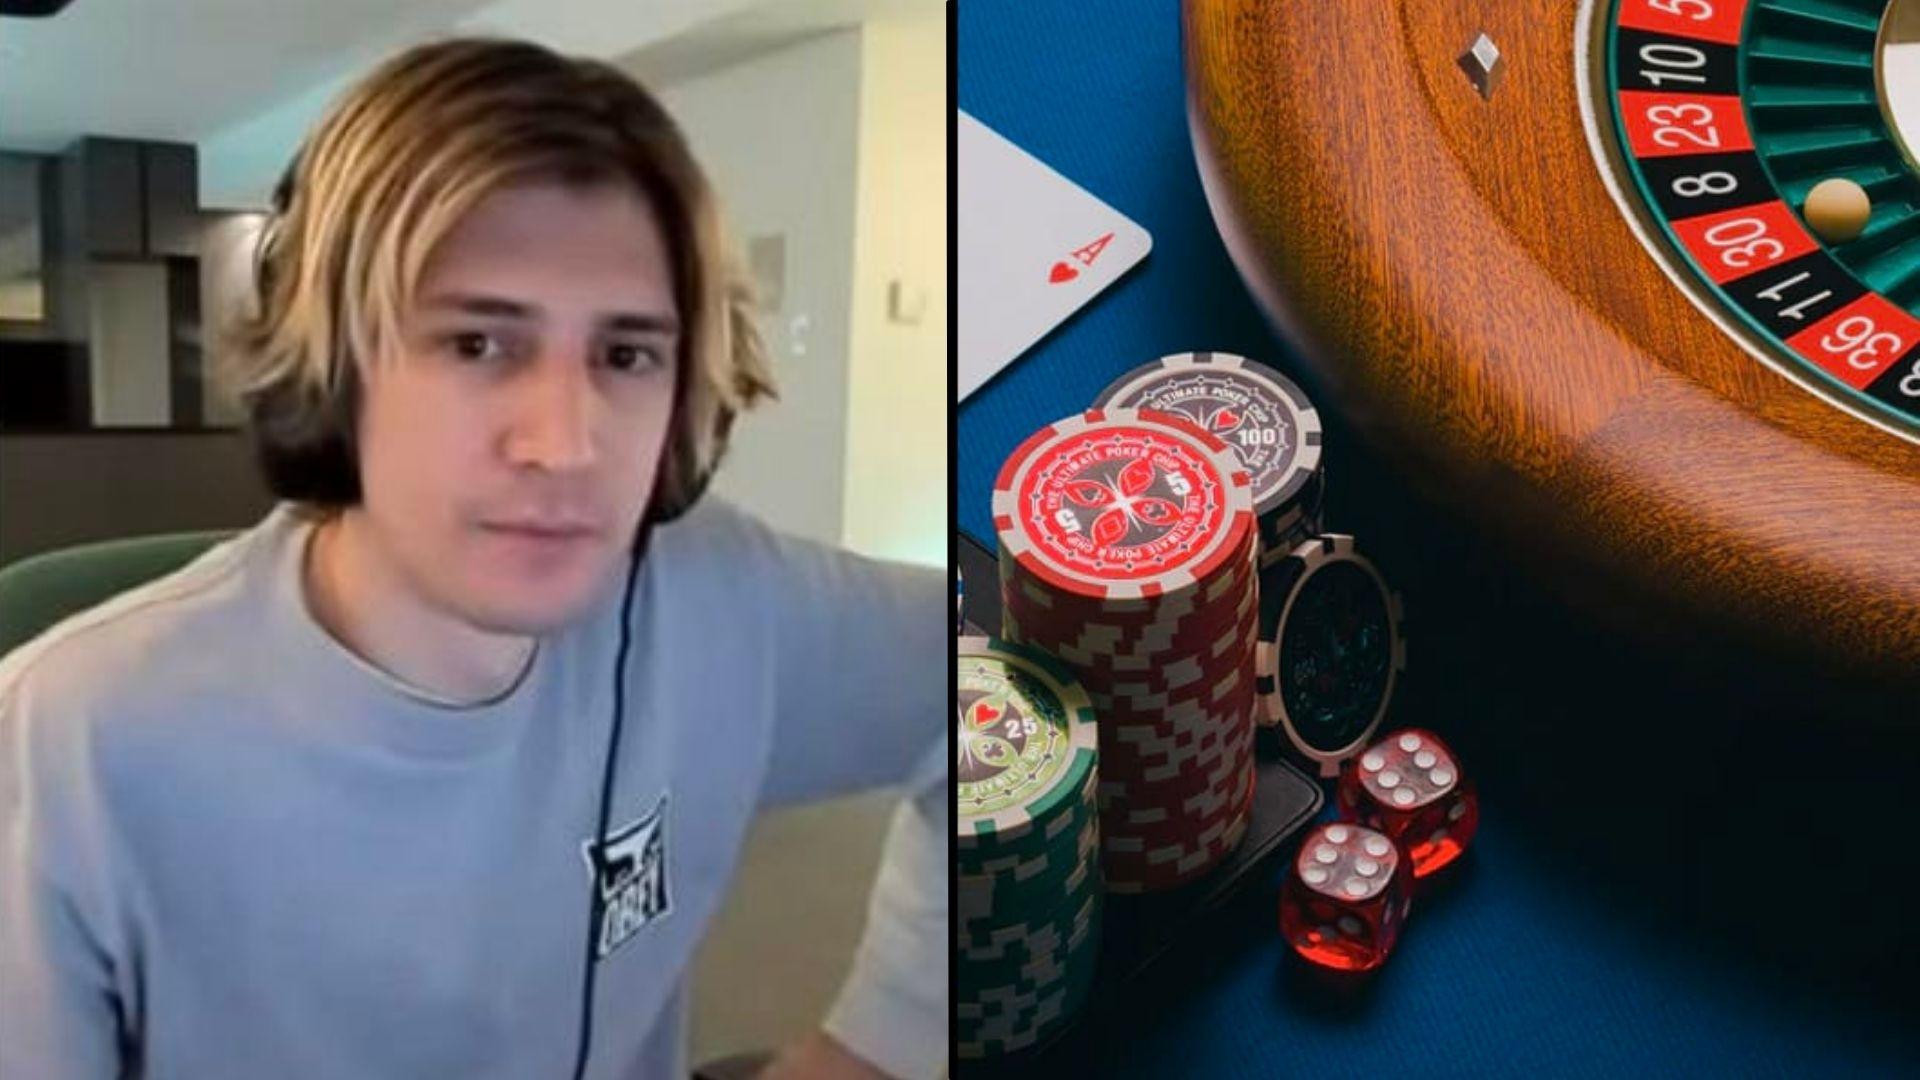 xQc looking at camera in grey shirt next to casino table with roulette cards and chips